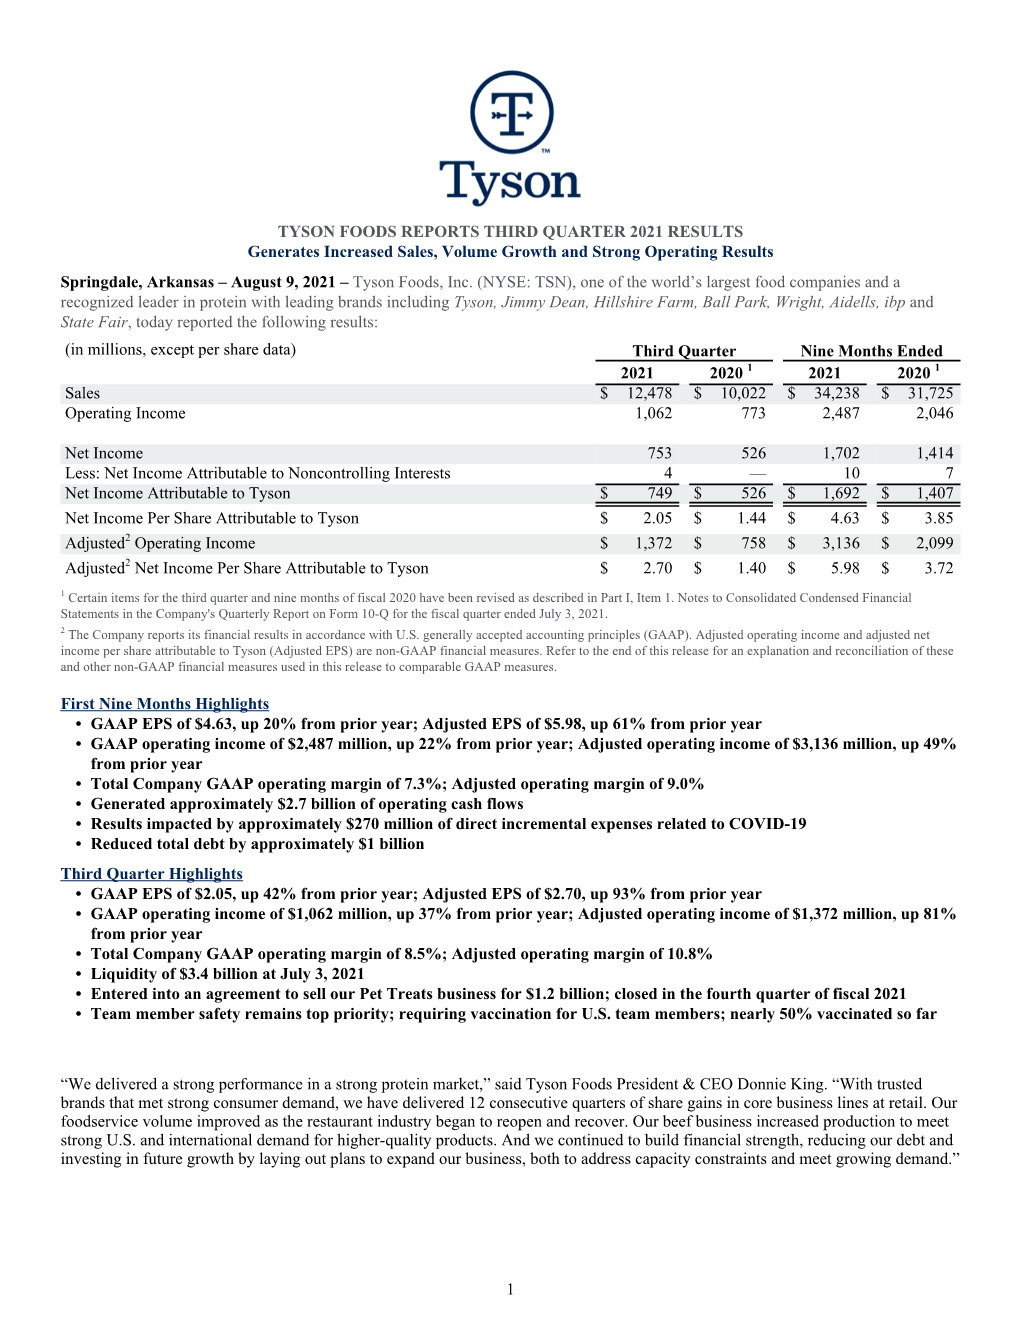 Tyson Foods Reports Third Quarter 2021 Results